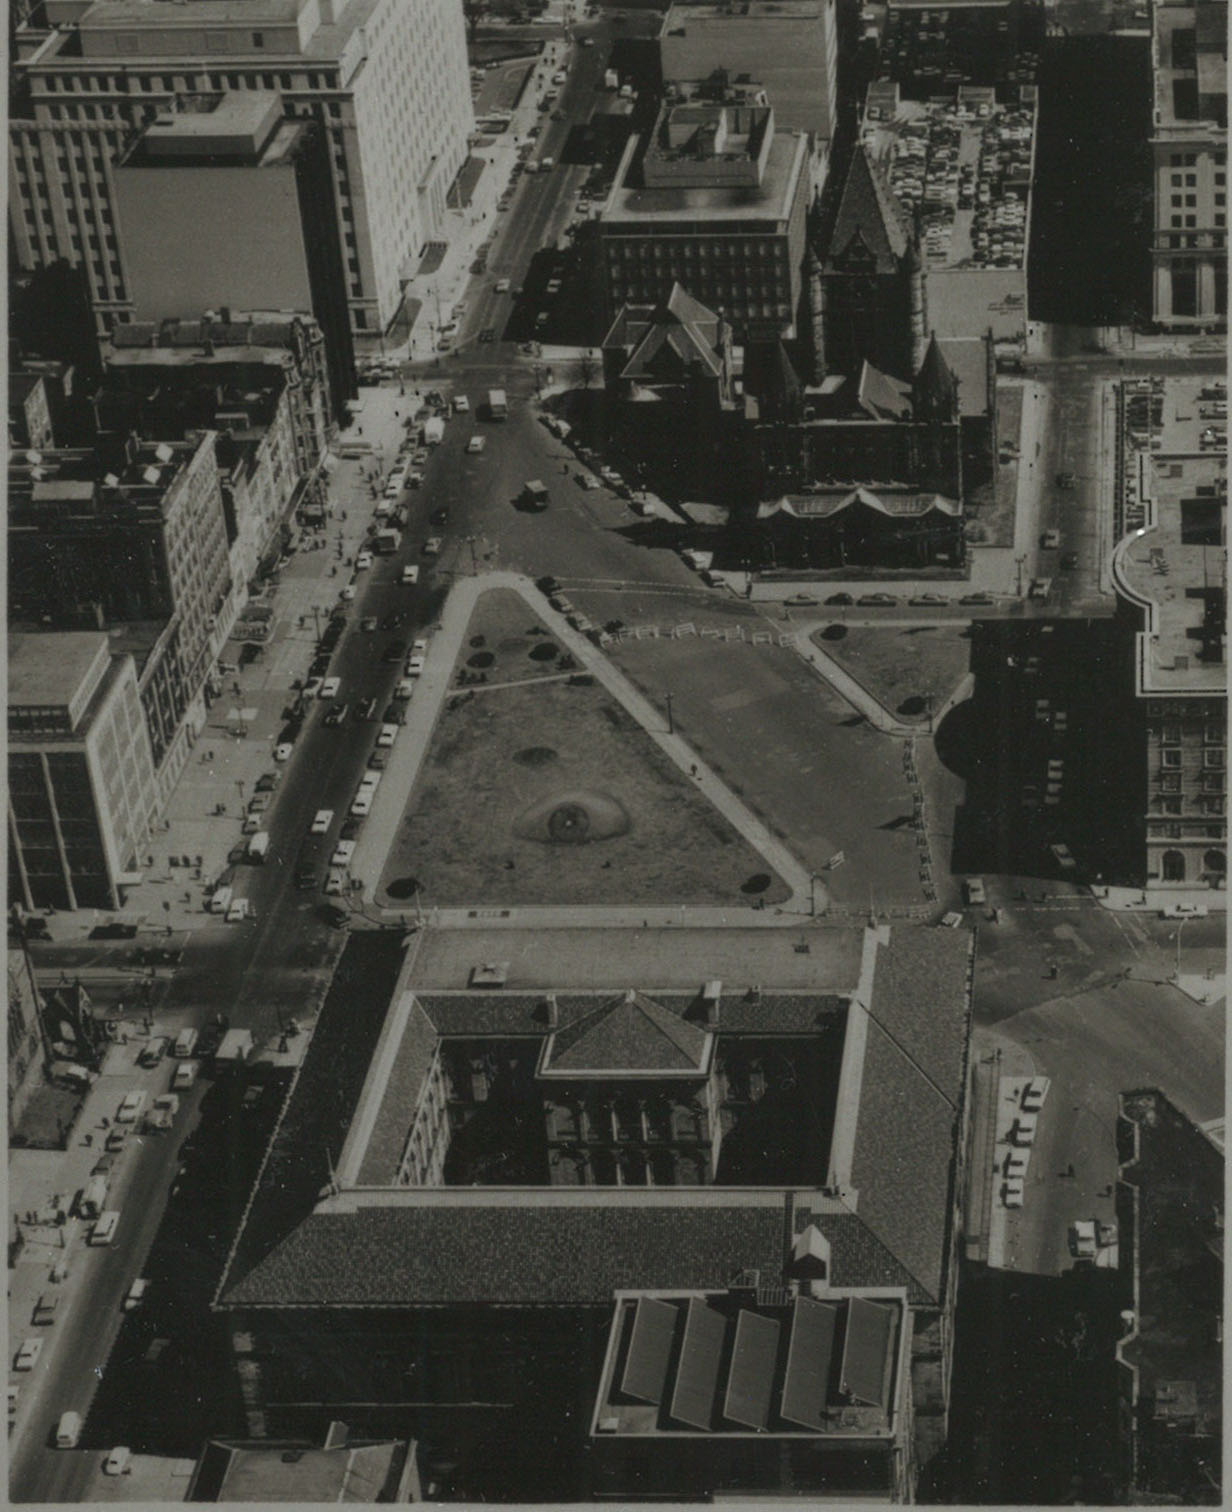 Black and white historical aerial photo of Copley Plaza when it was a triangular shape